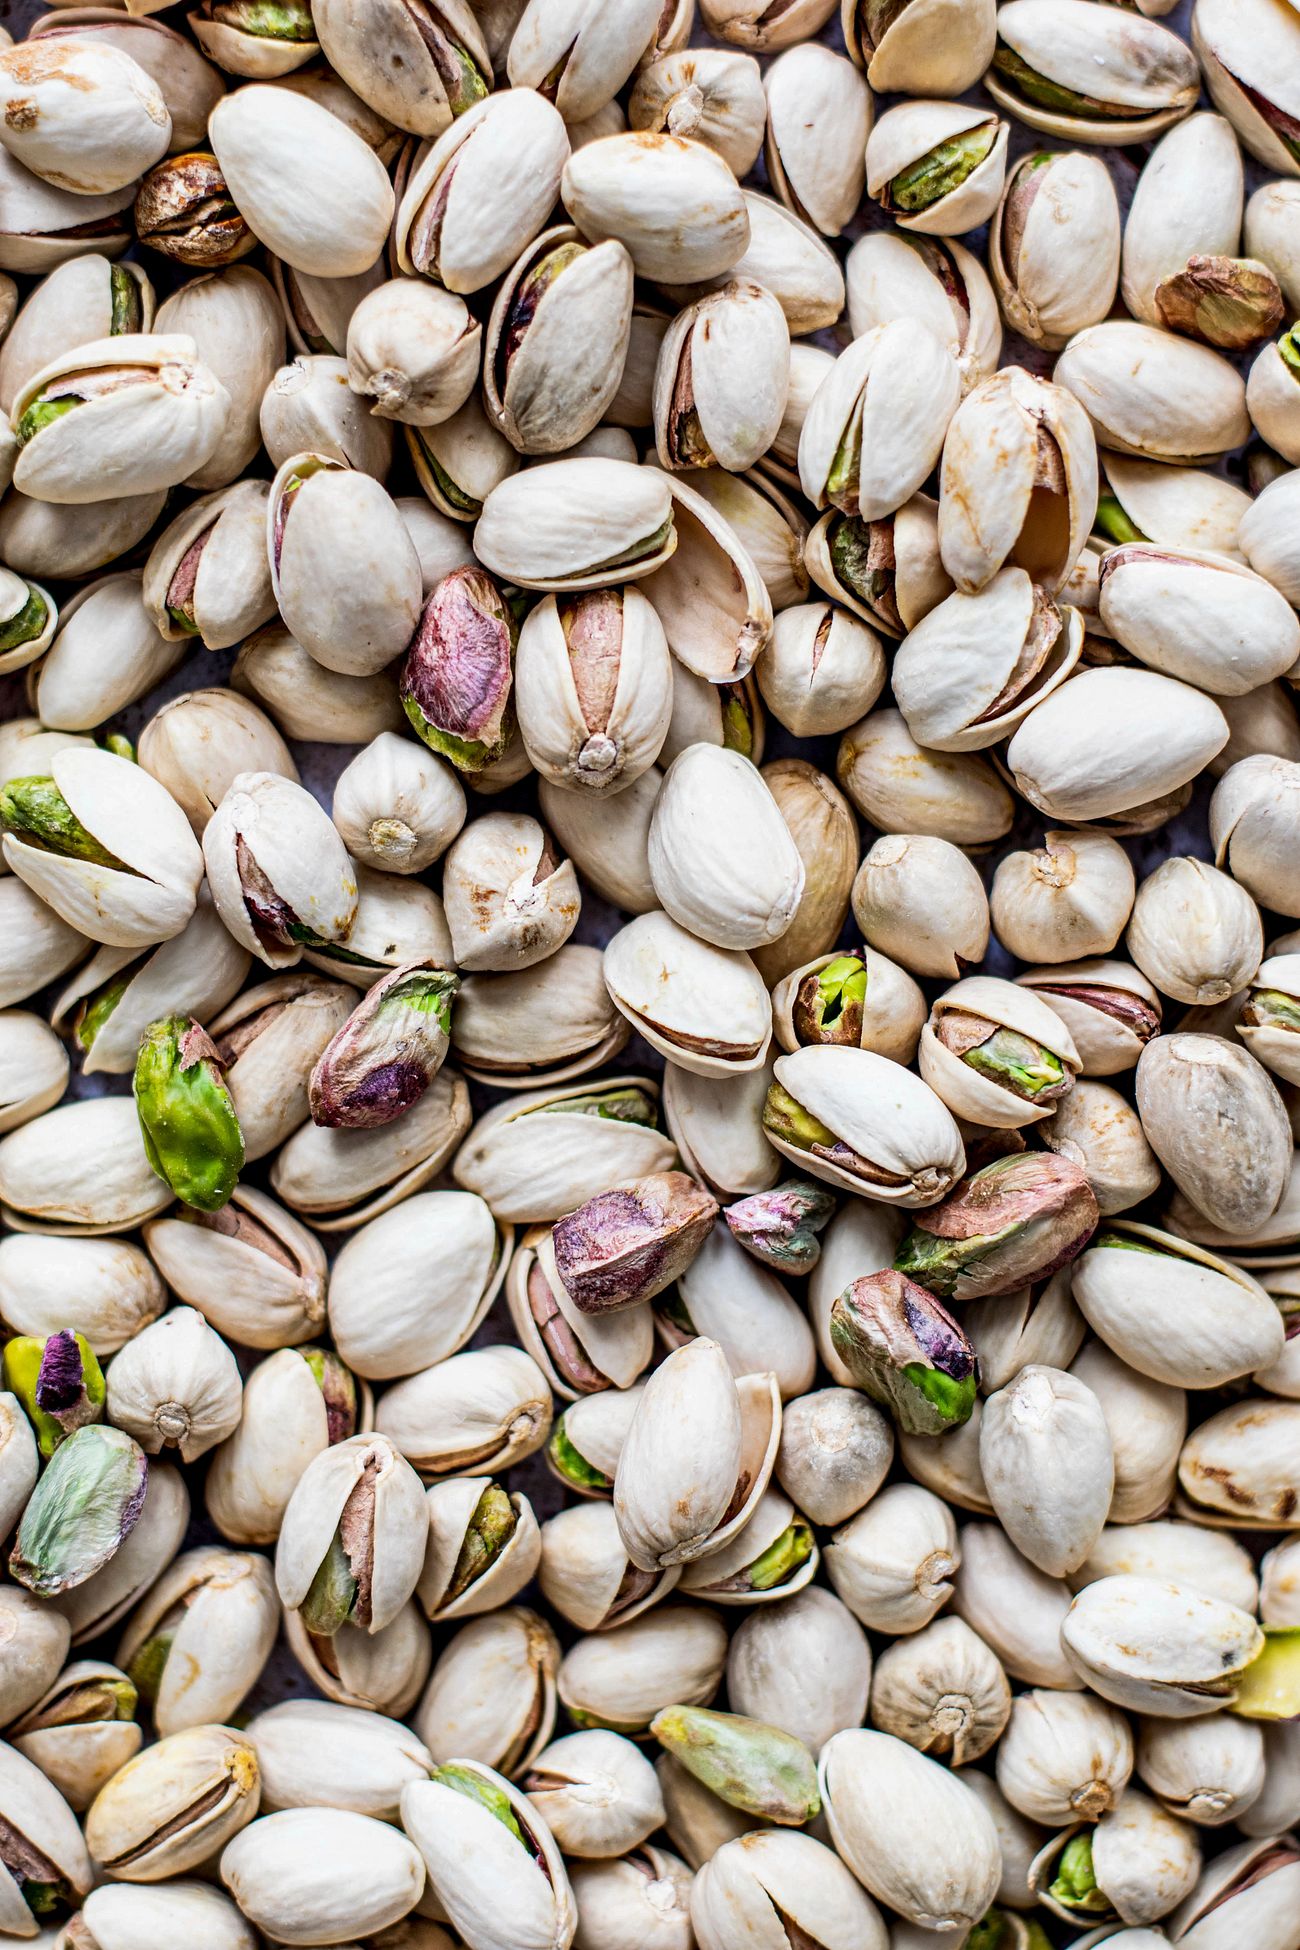 Roasted pistachio nuts | Royalty free photo - 2037893